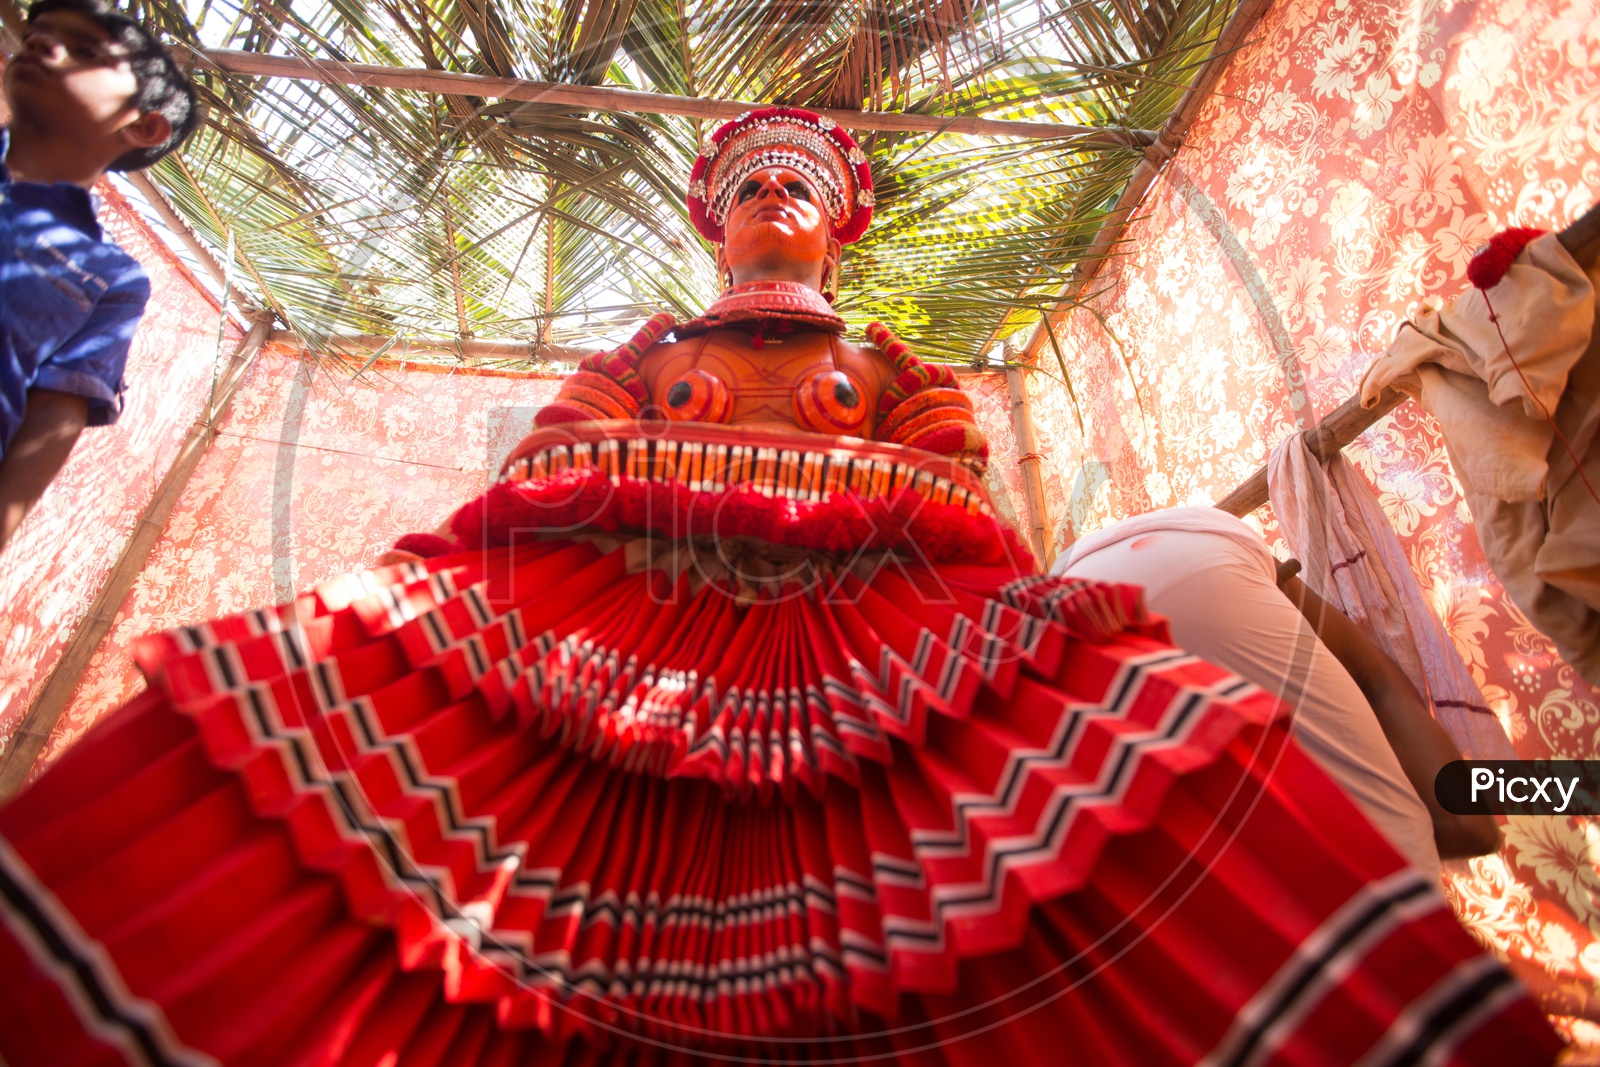 A Theyyam performer in colourful costume